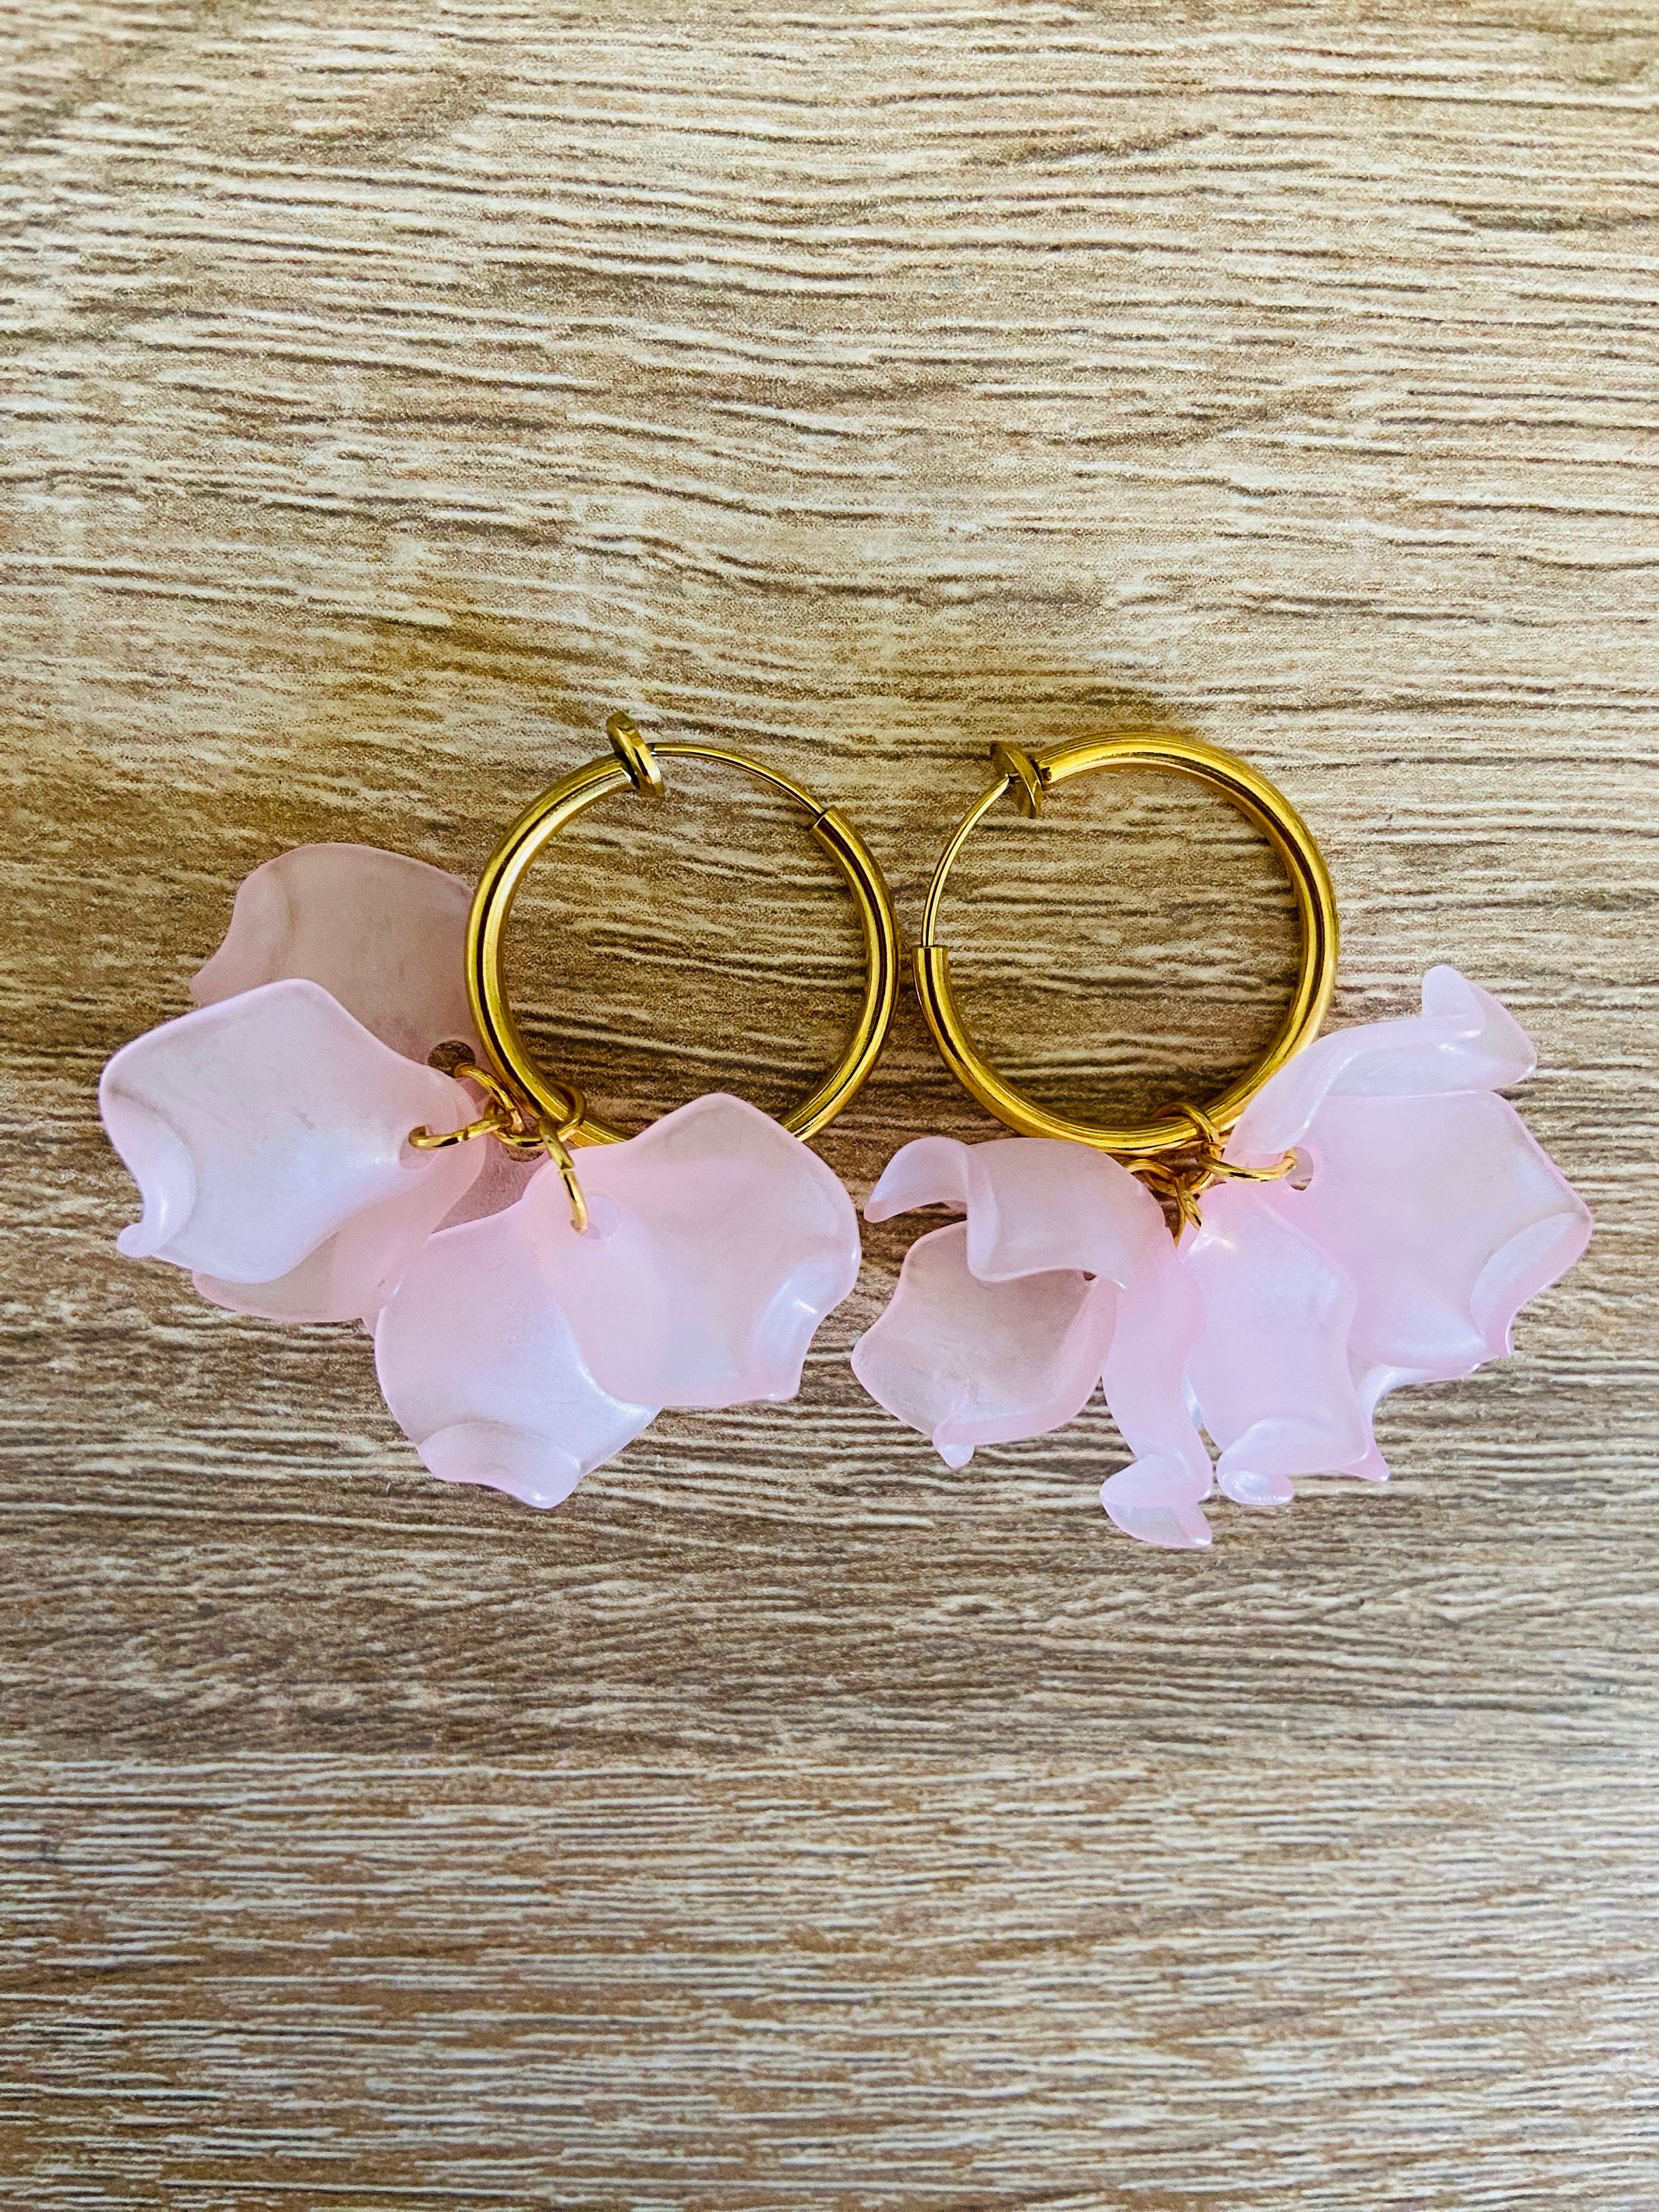 CAMILLE Clip-on Hoop Earrings for Non-pierced Ears in Stainless Steel  Decorated With Sézane-inspired Flower Petals - Etsy